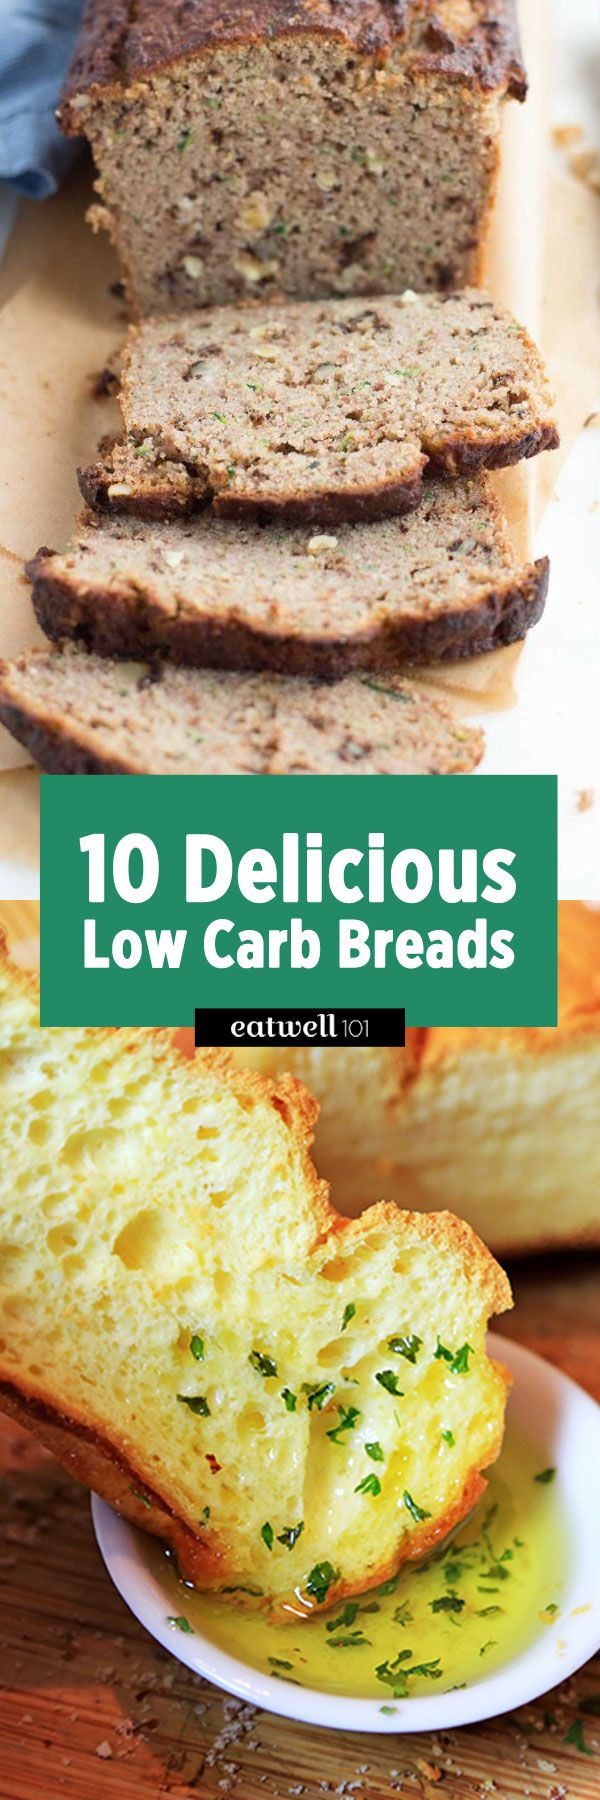 Easy Diabetic Recipes Low Carb
 10 Delicious Low Carb Breads